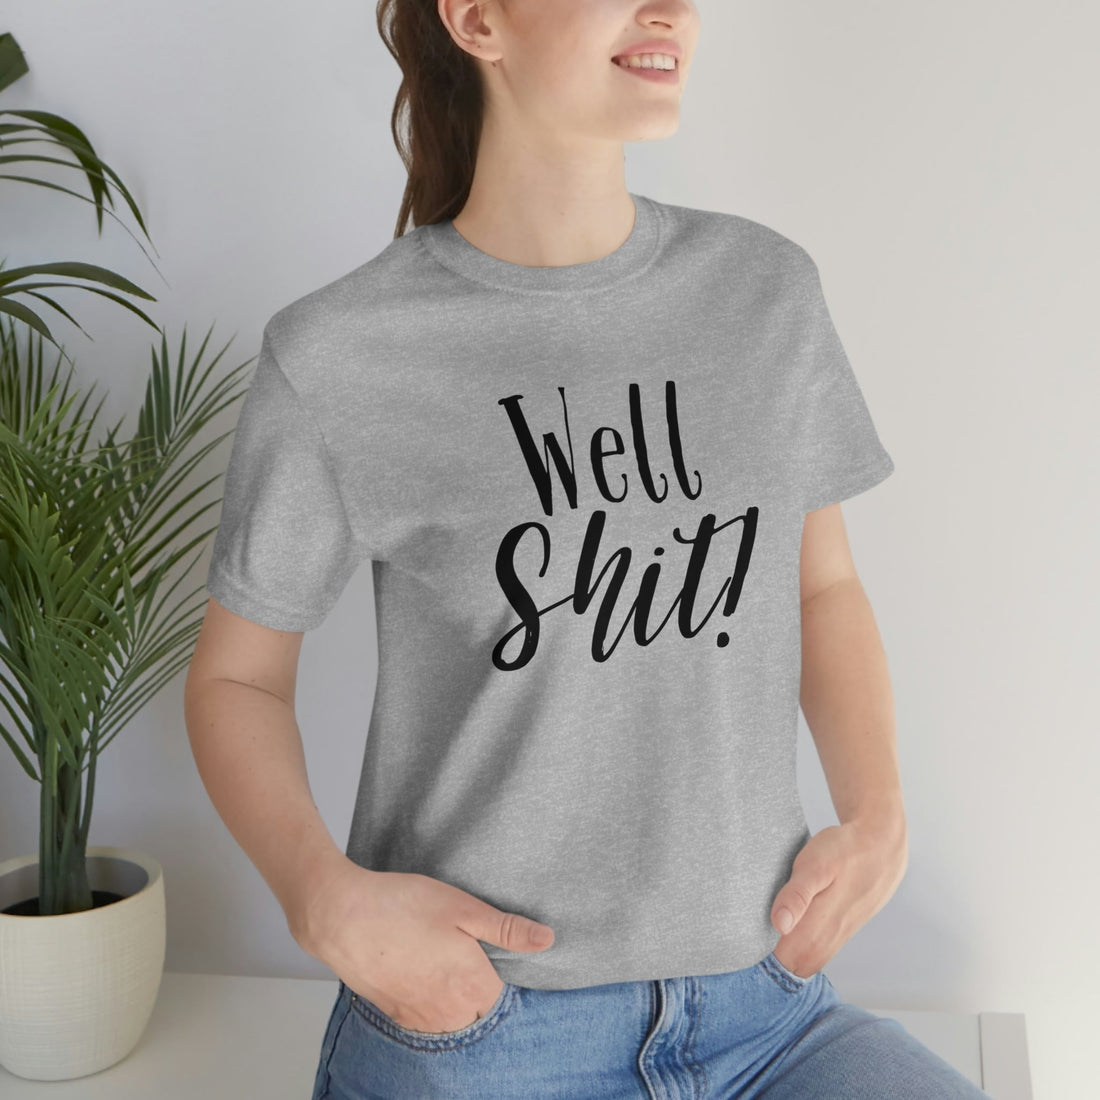 Well S!*% - T-Shirt - Positively Sassy - Well S!*%